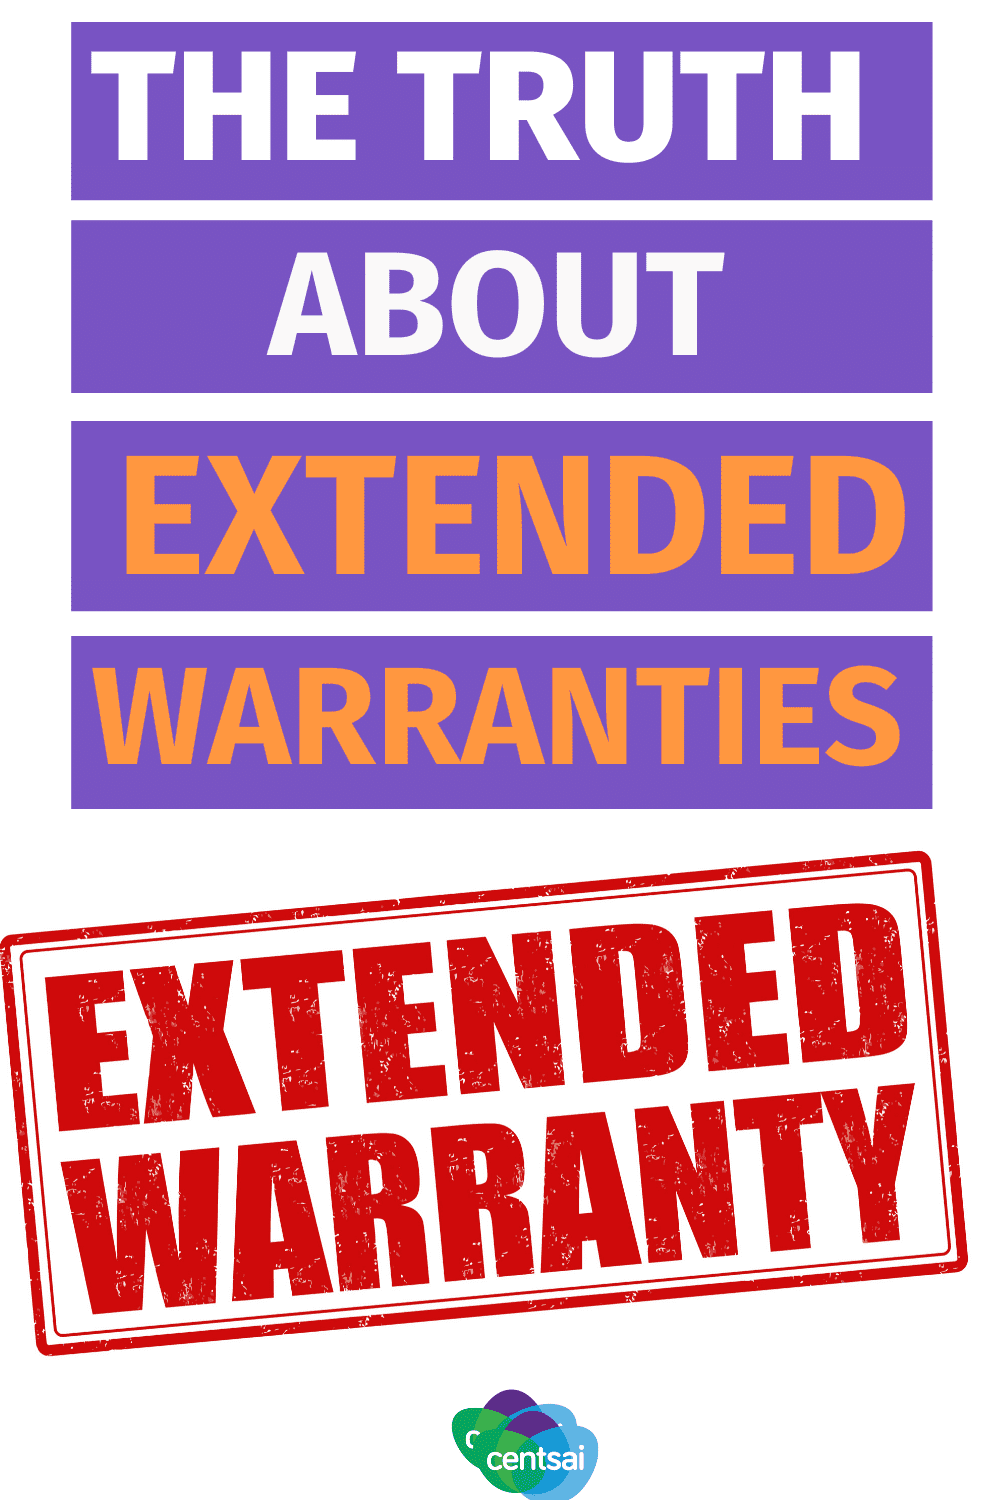 The Truth About Extended Warranties